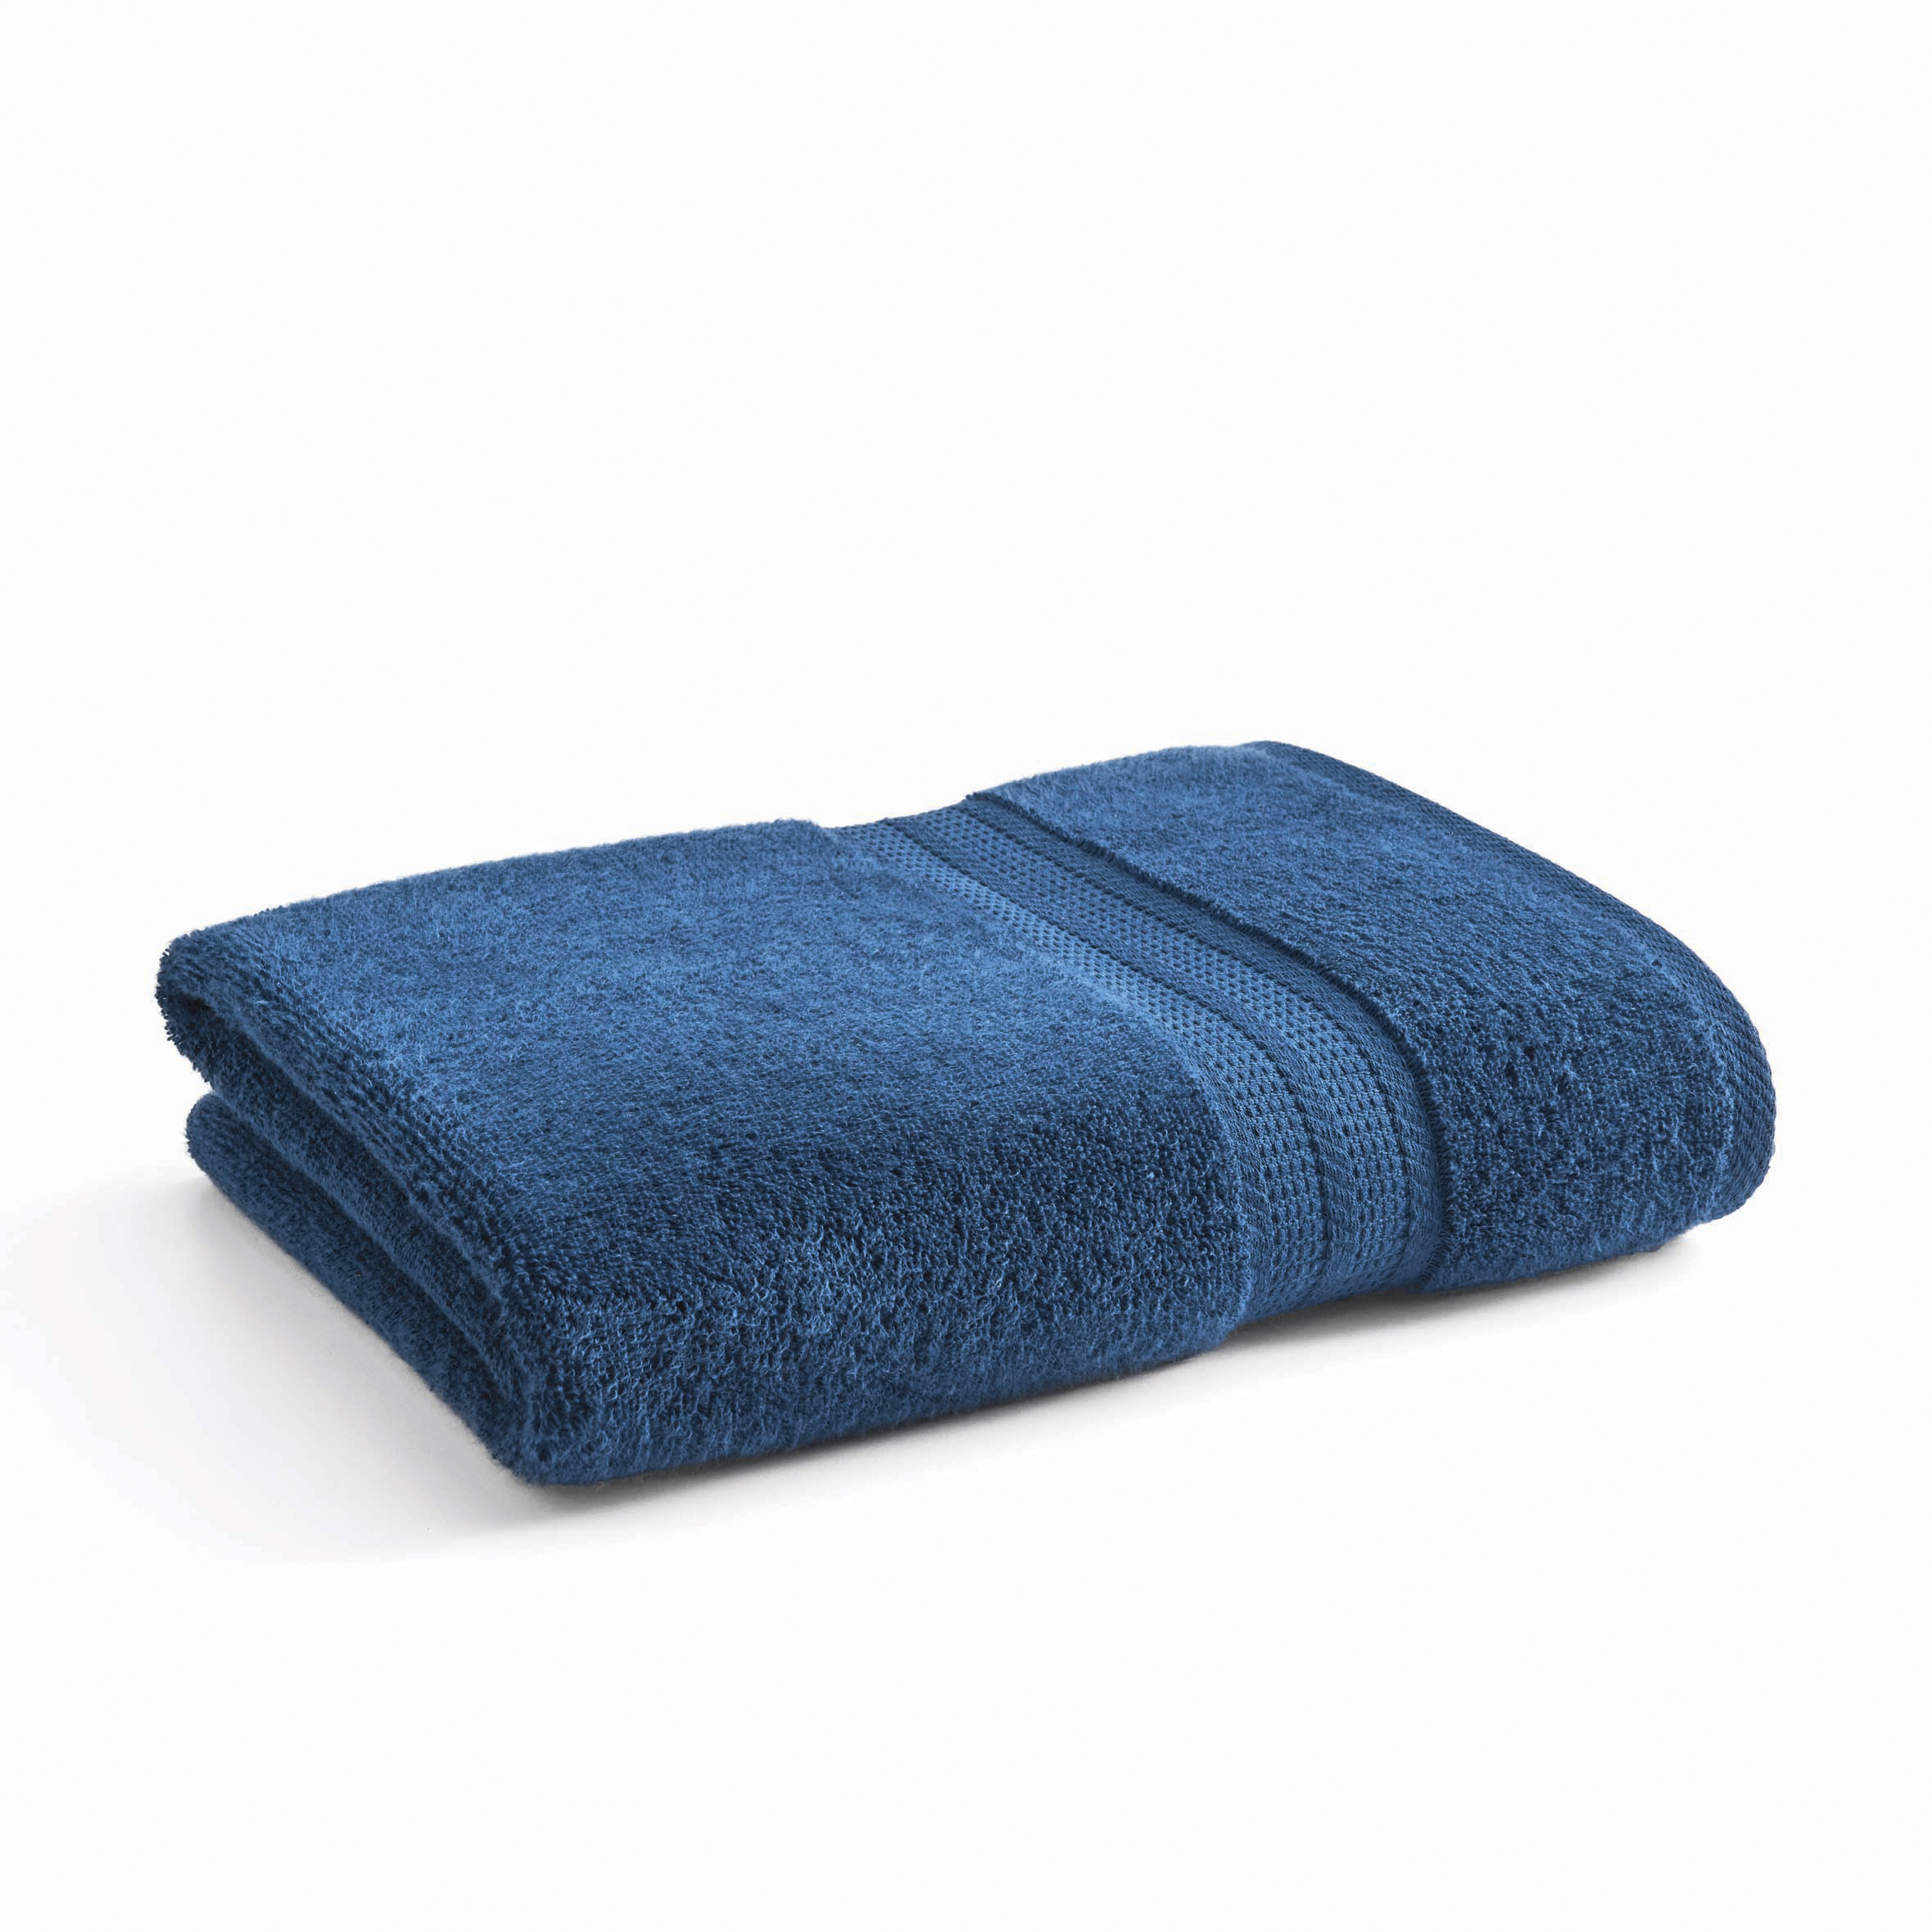 Better Homes & Gardens Adult Bath Towel, Solid Blue - image 1 of 7